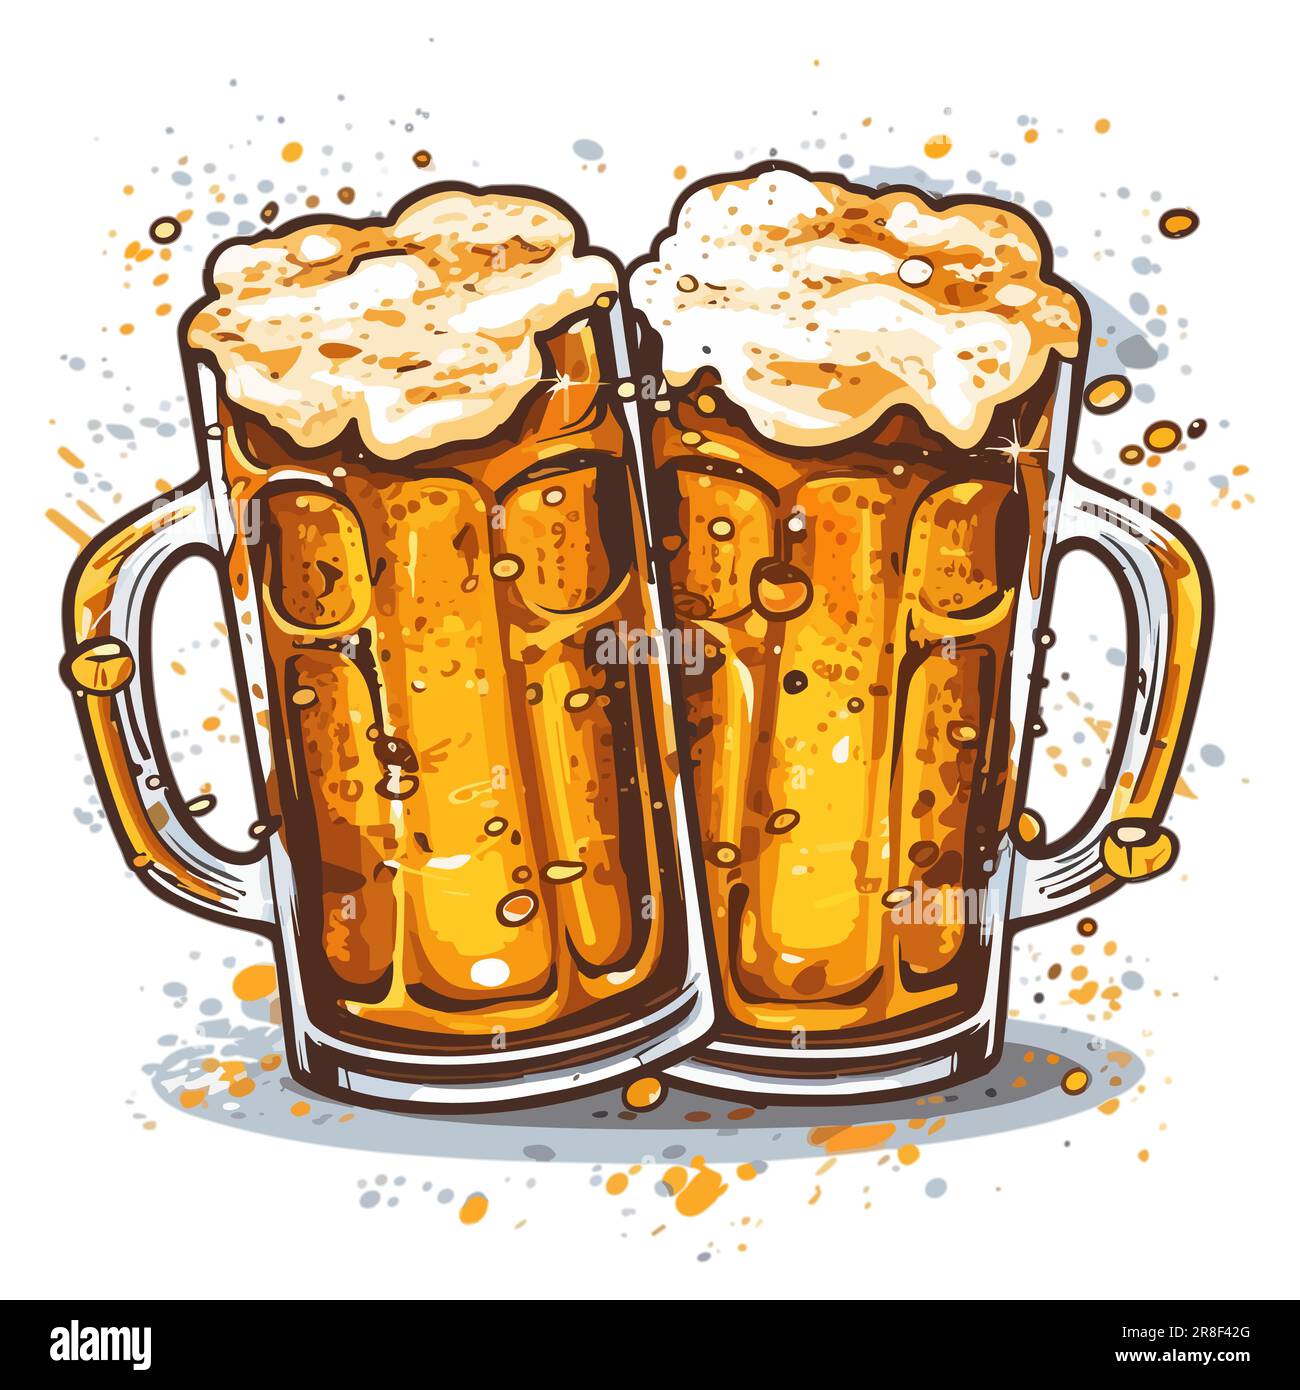 Beer mugs, comic style vector illustration on white background Stock Vector